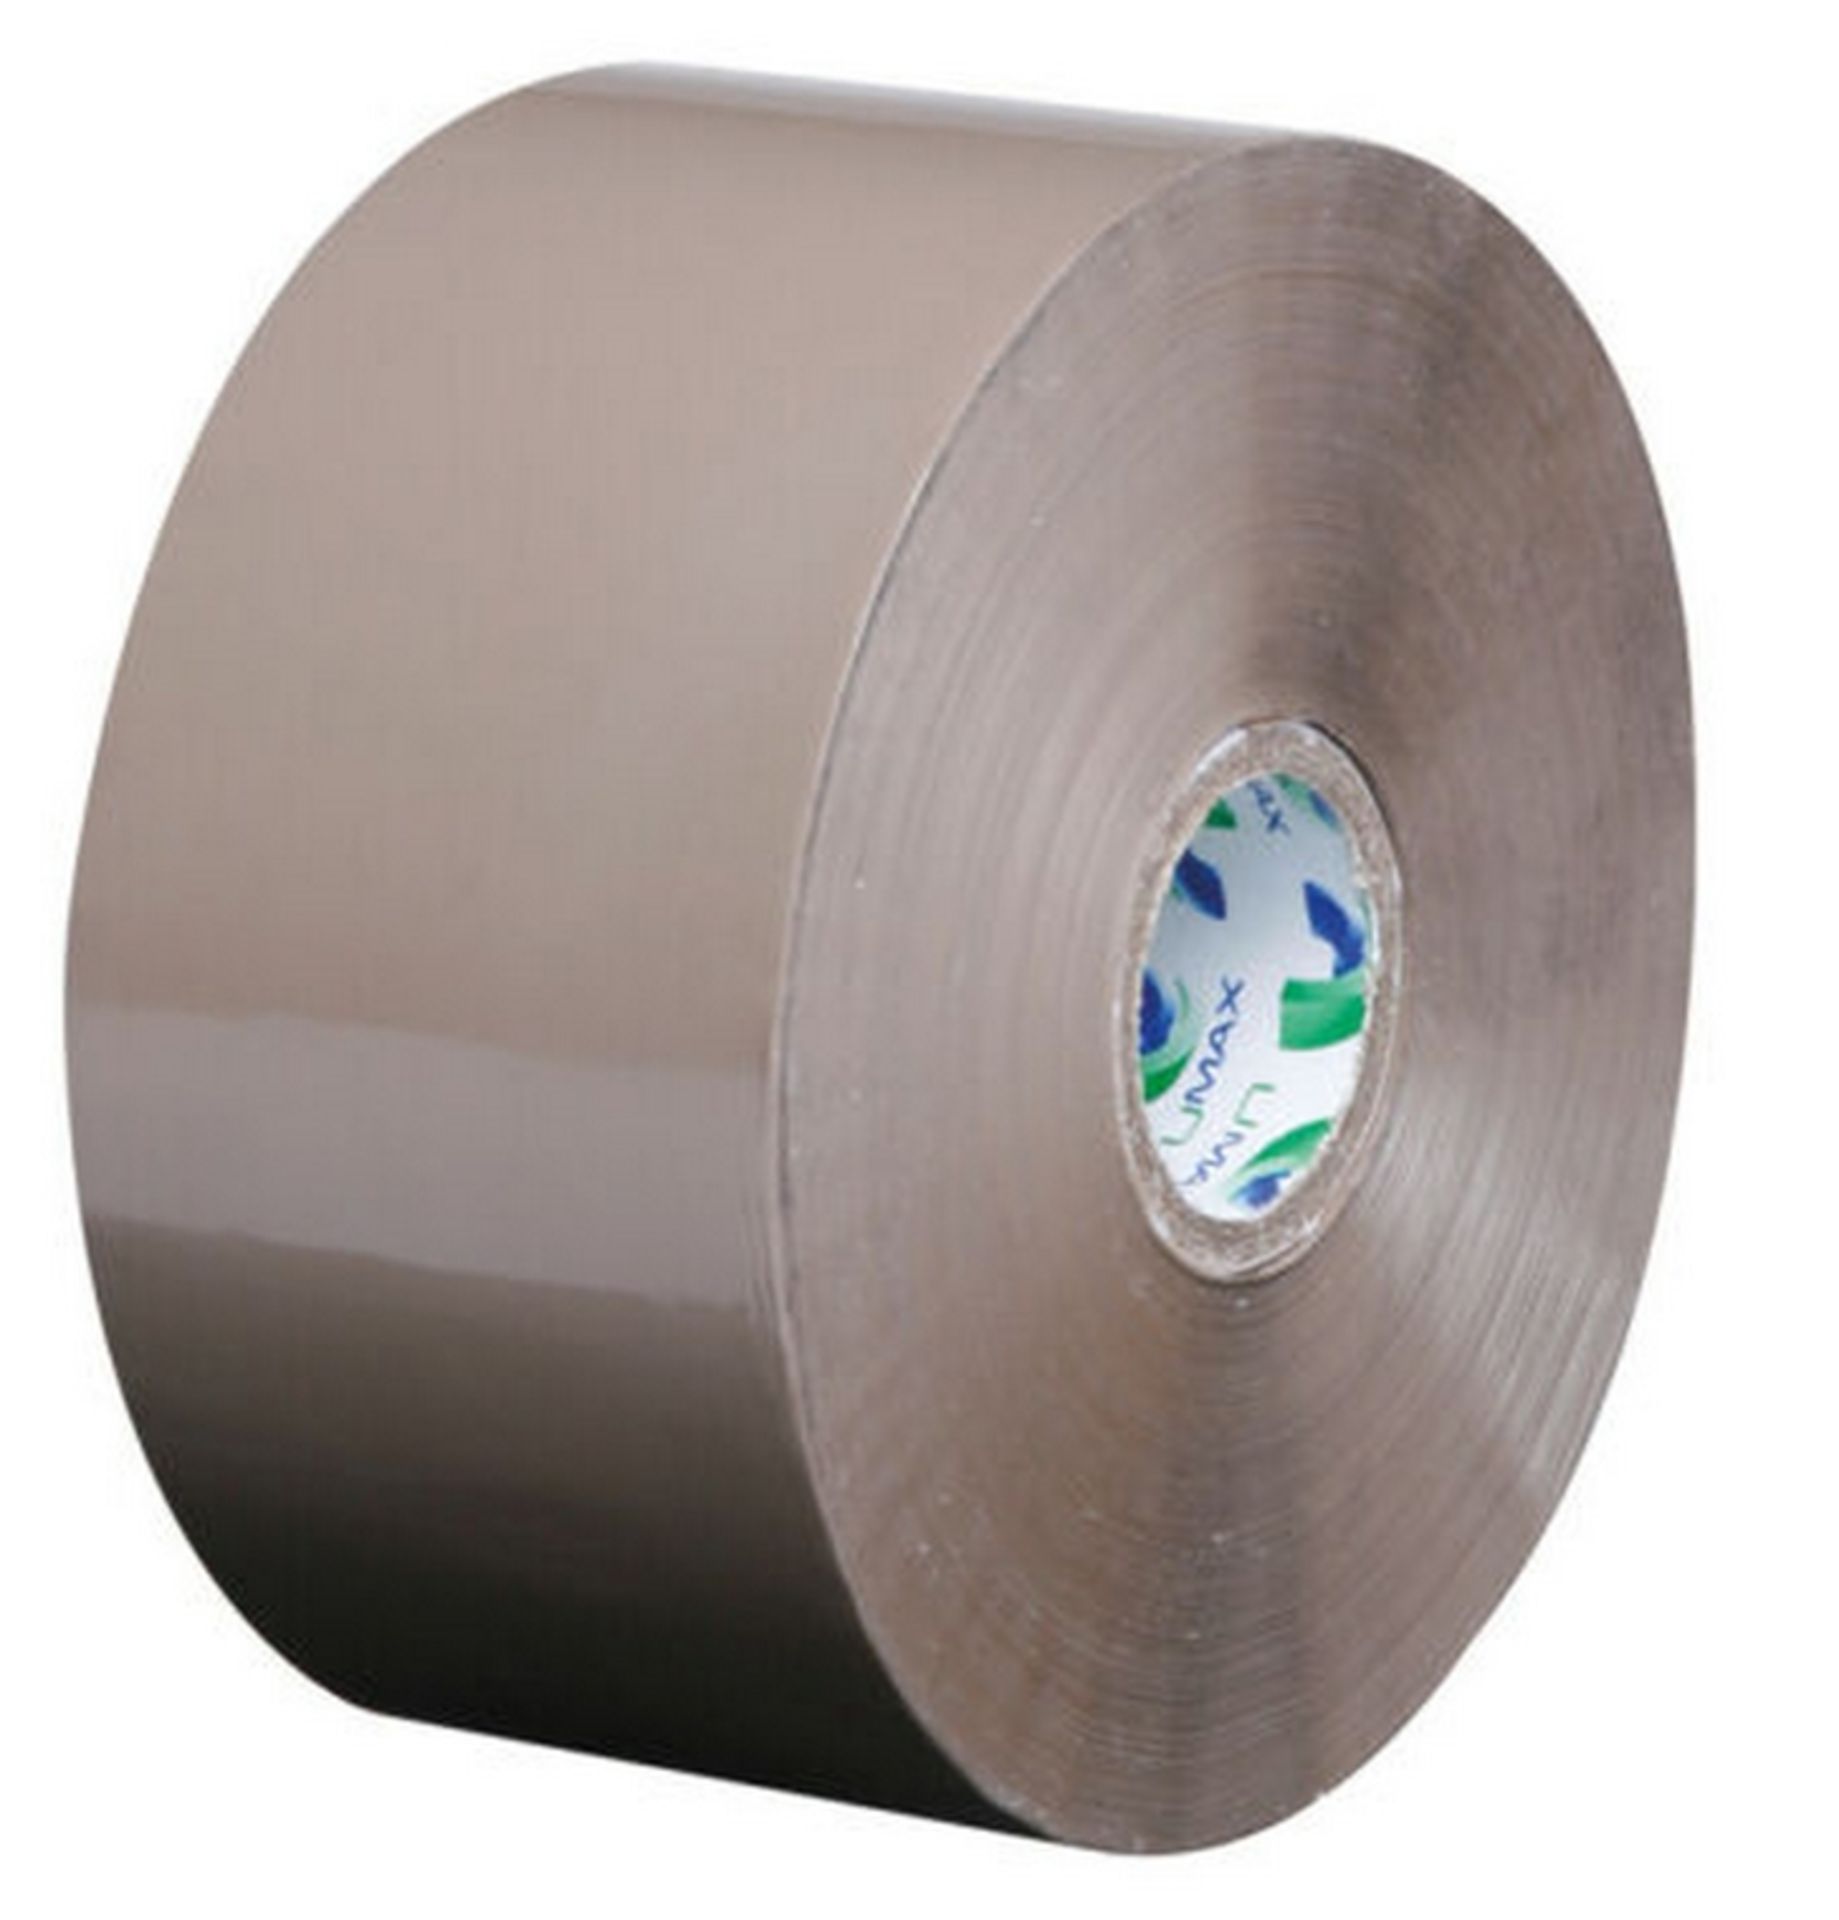 20 Rolls Of Top Quality Buff Parcel Tape 48Mm Wide And 150 Meters Long, Yes You Read